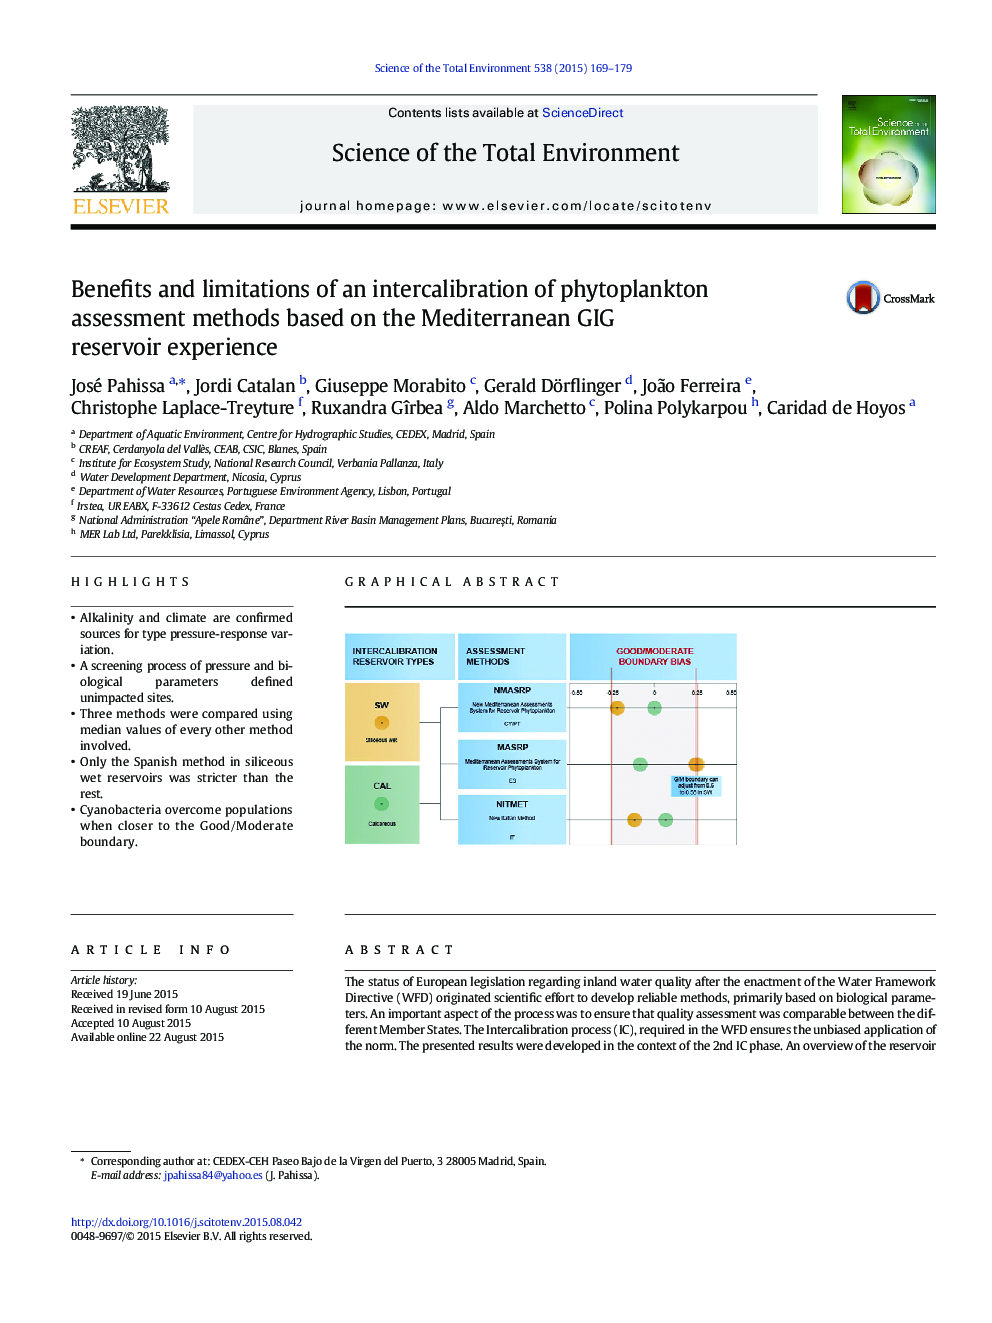 Benefits and limitations of an intercalibration of phytoplankton assessment methods based on the Mediterranean GIG reservoir experience